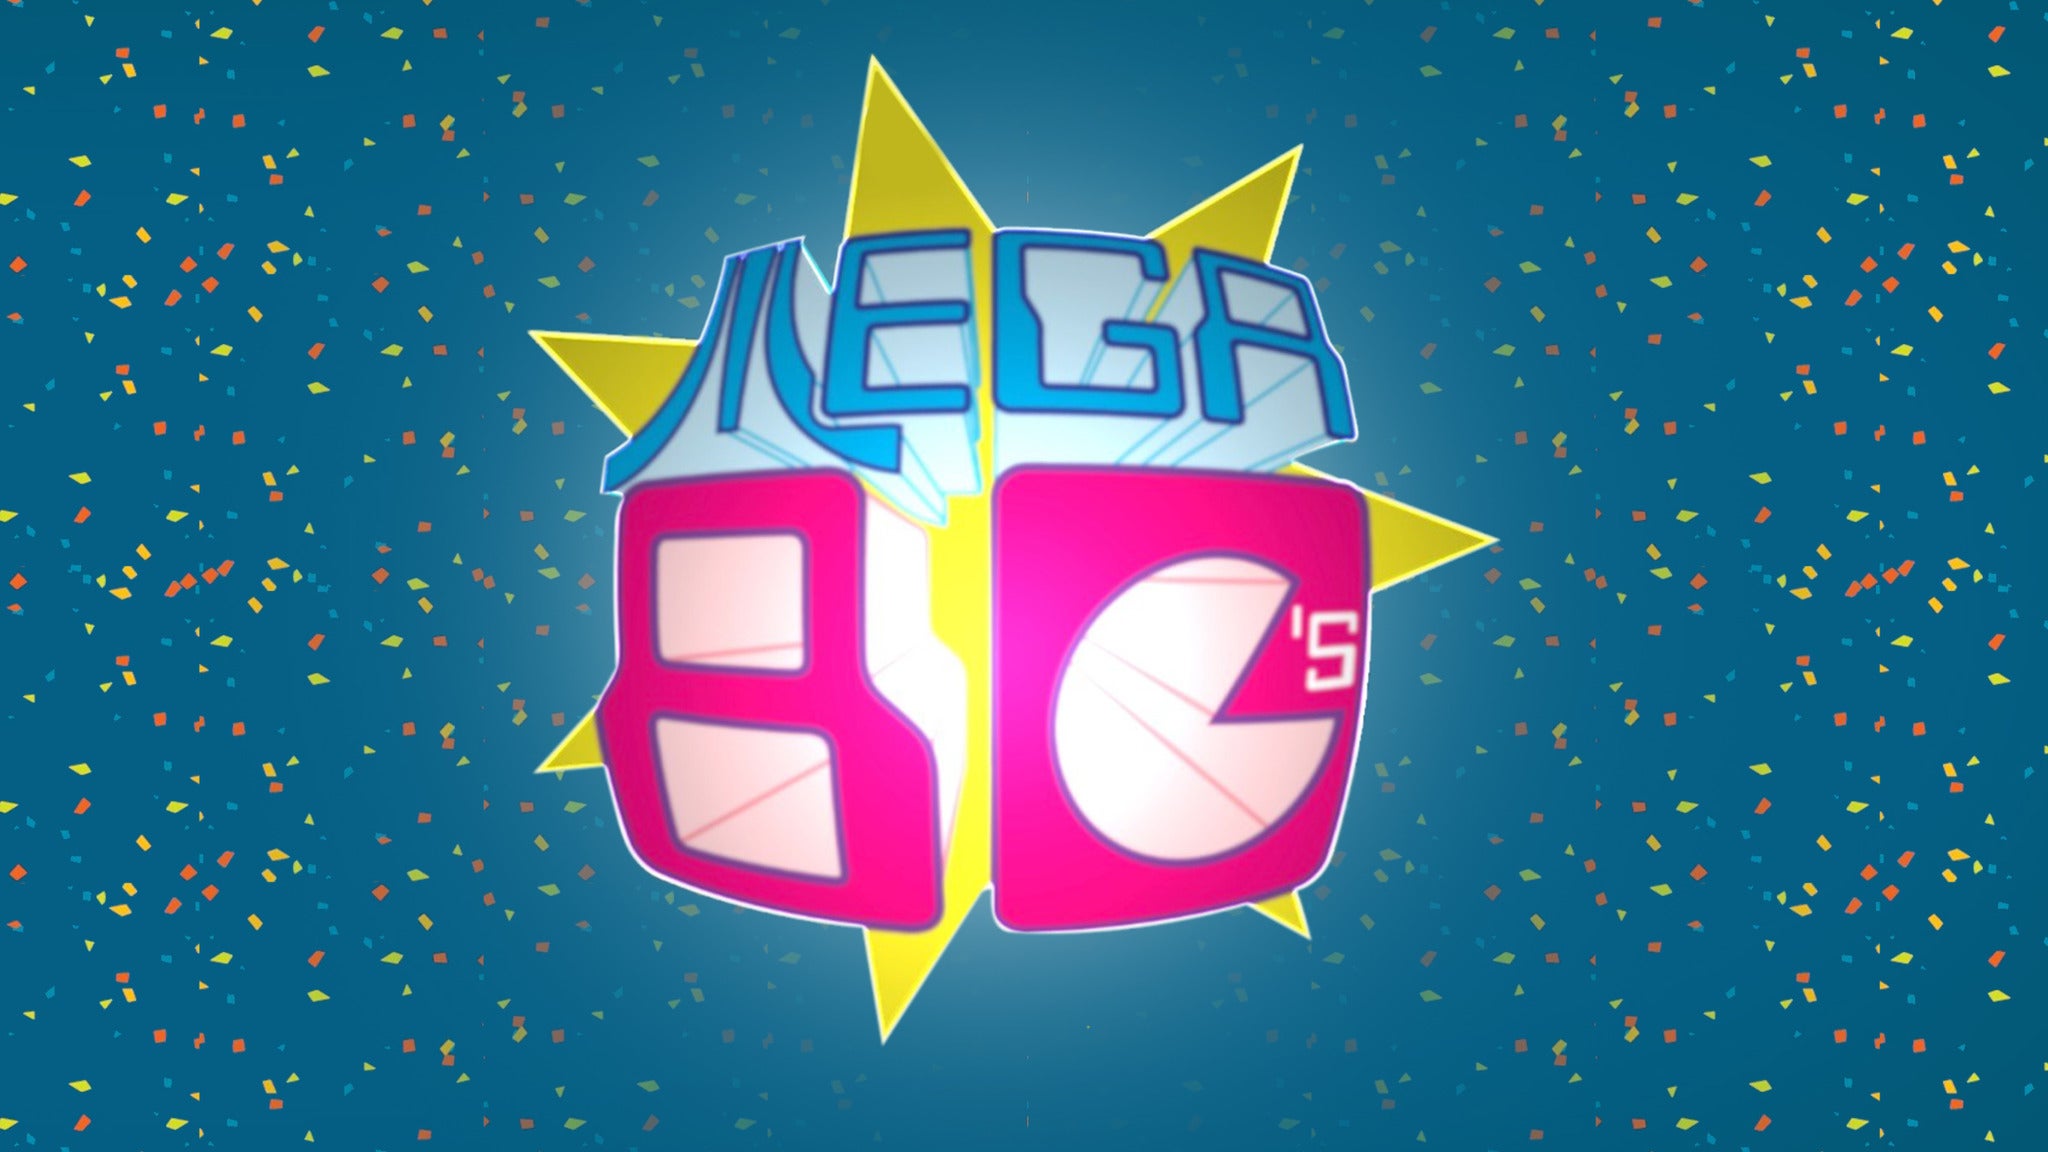 The Mega 80's presale password for your tickets in Cleveland